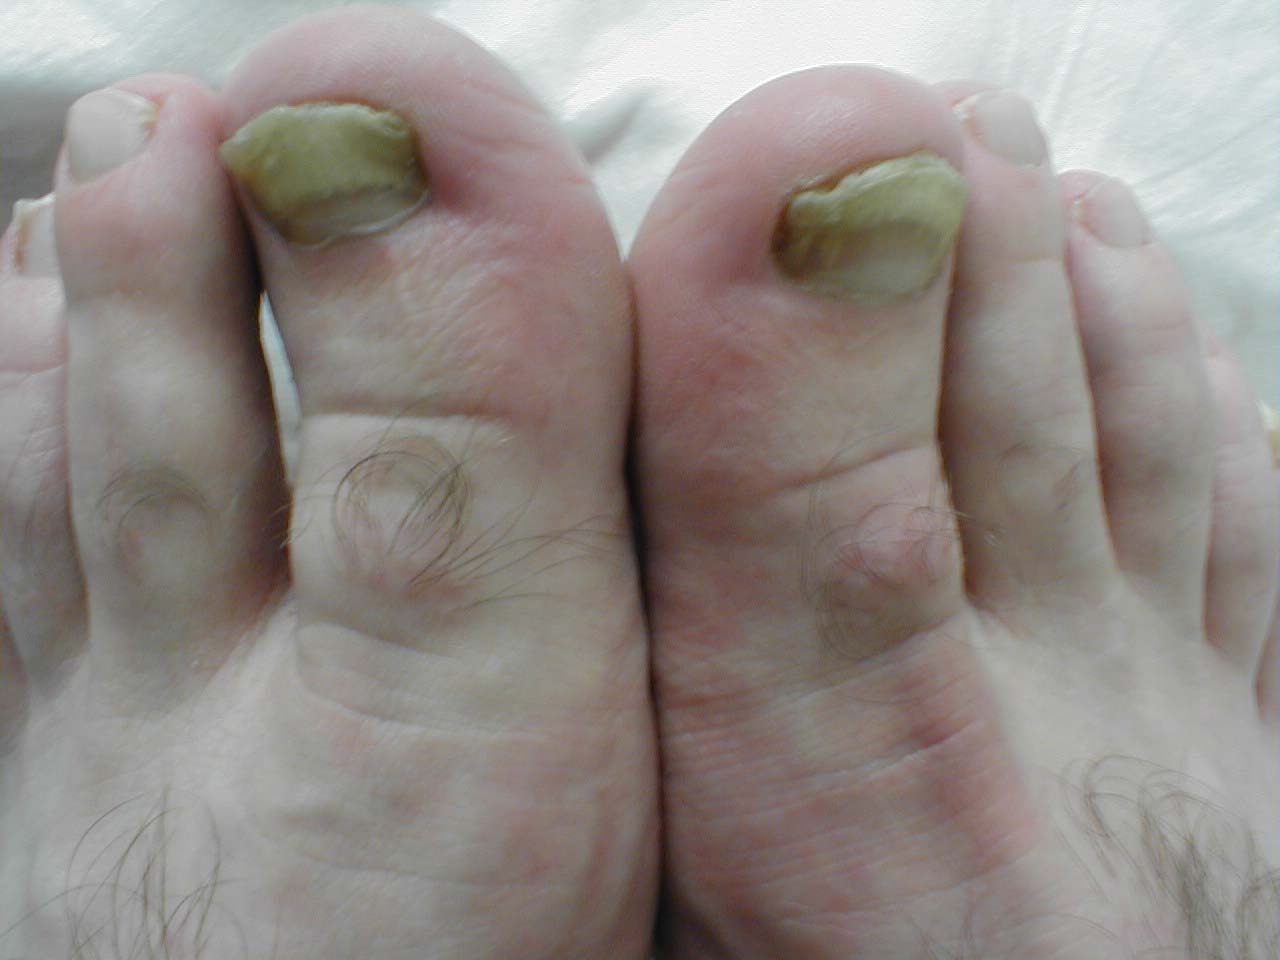 Onychomycosis: Chronic fungal toenail infection causing deformity and discoloration.